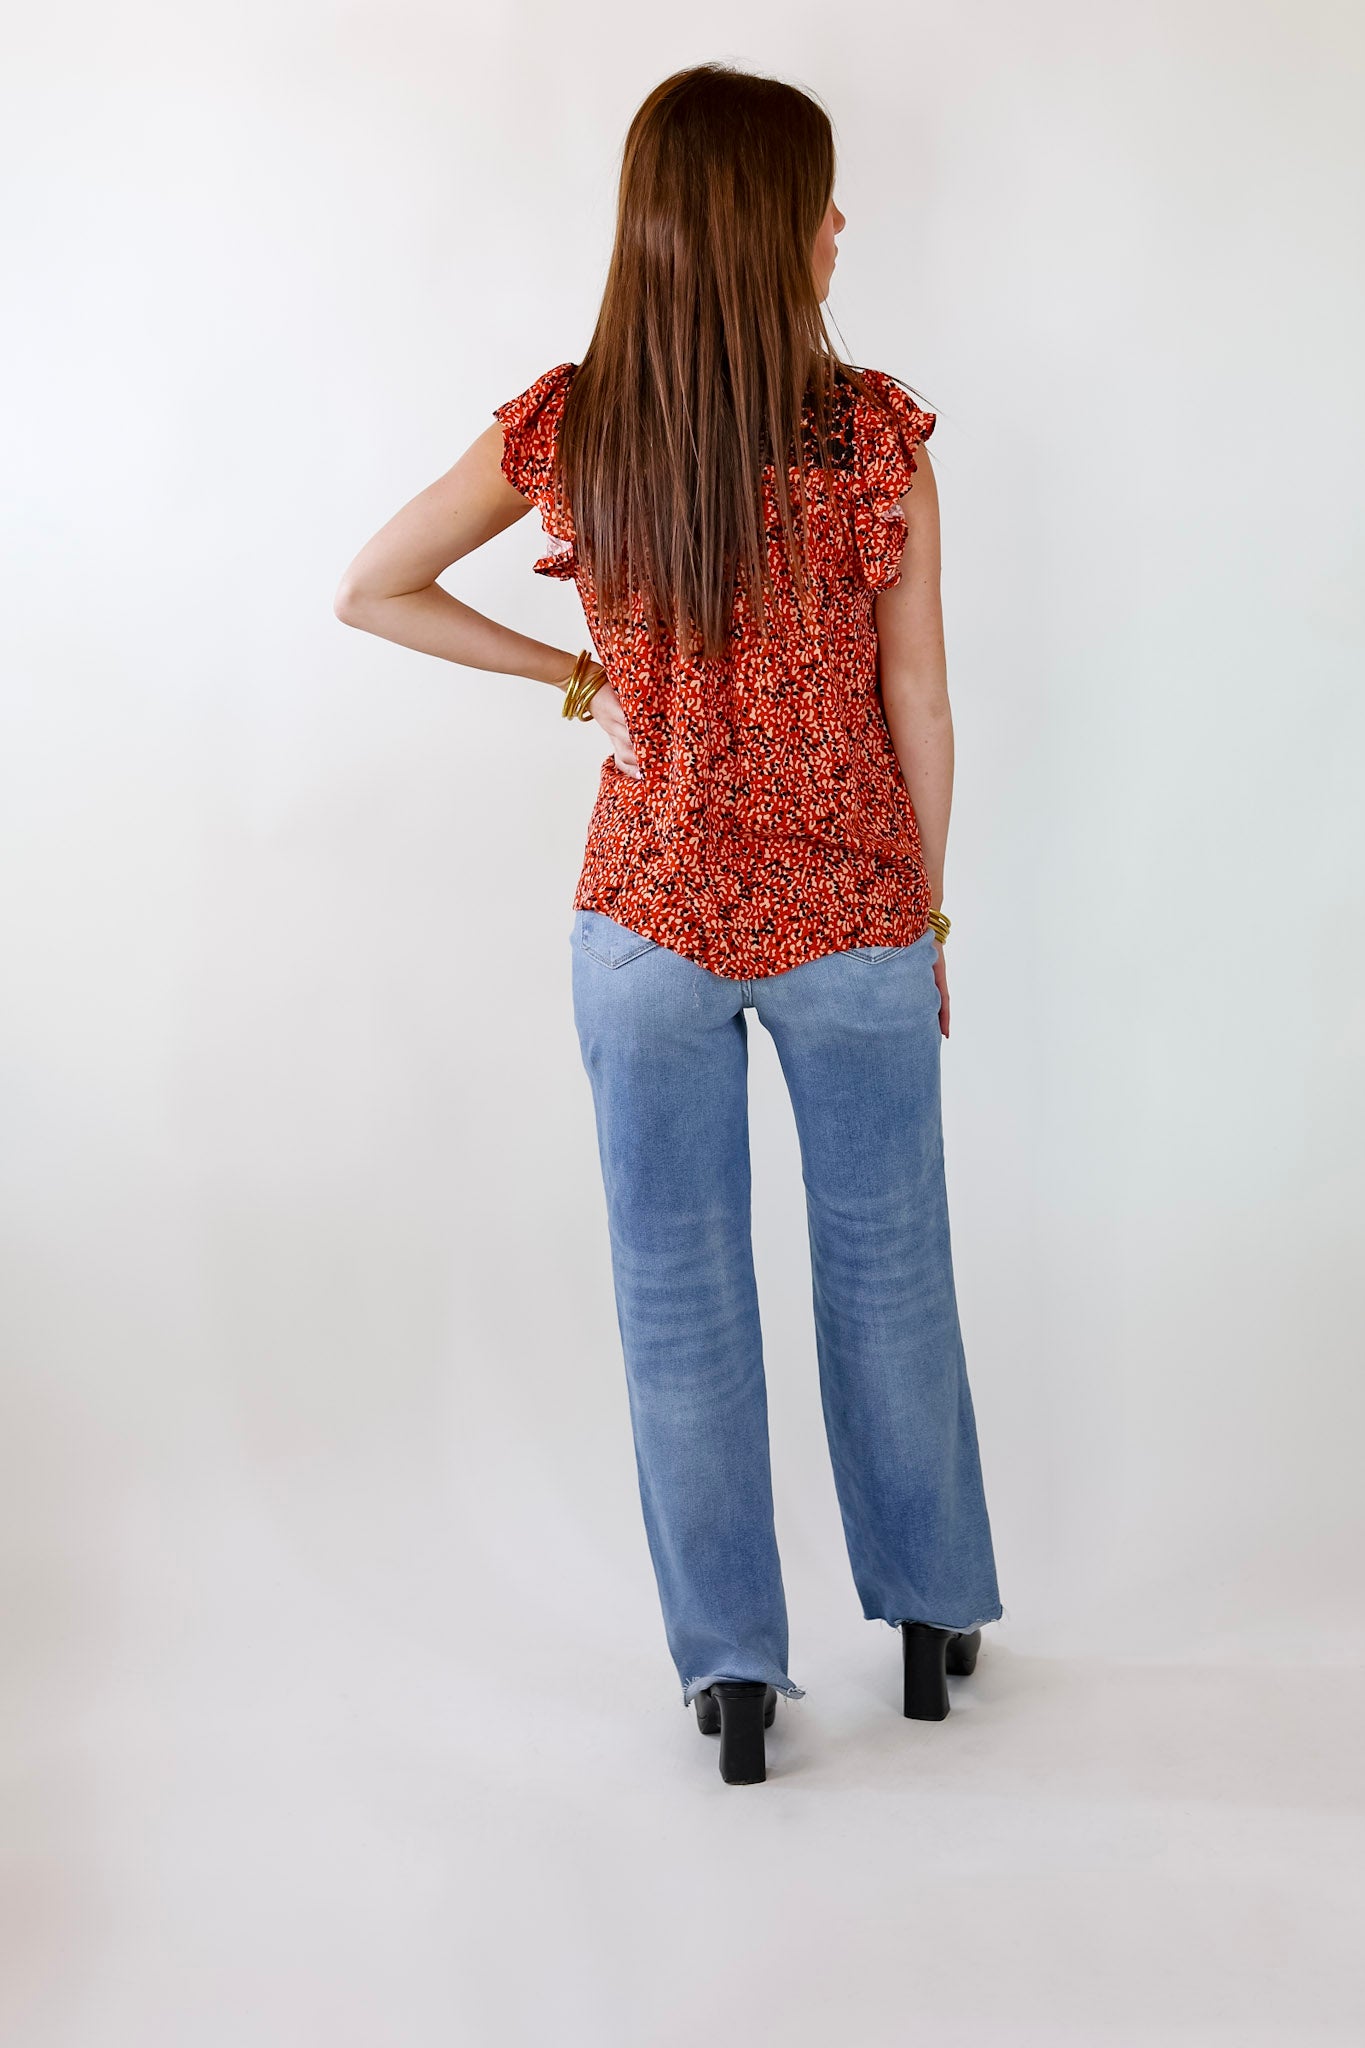 Overlook Hotel Floral Embroidered Top in Red - Giddy Up Glamour Boutique